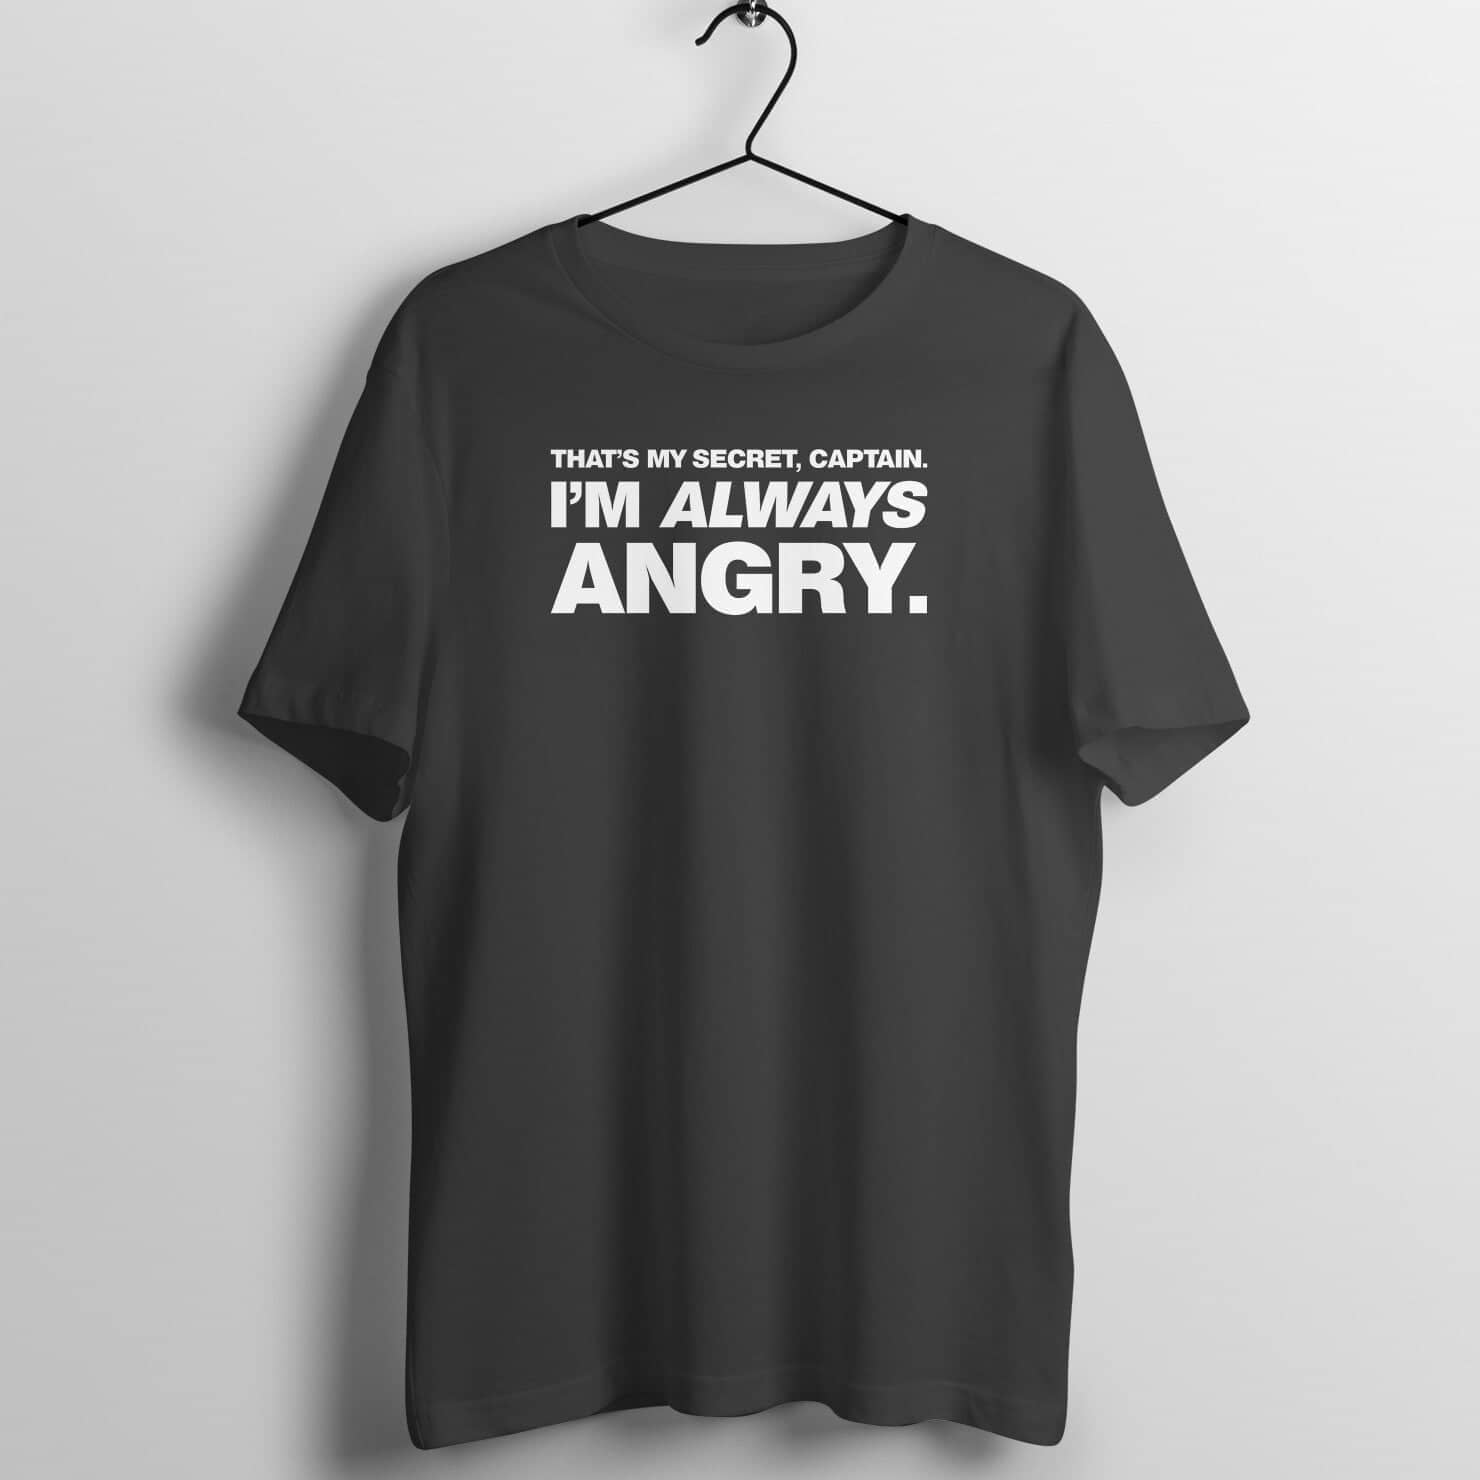 I'm Always Angry Exclusive Black Hulk T Shirt for Men and Women Shirts & Tops Printrove Black S 